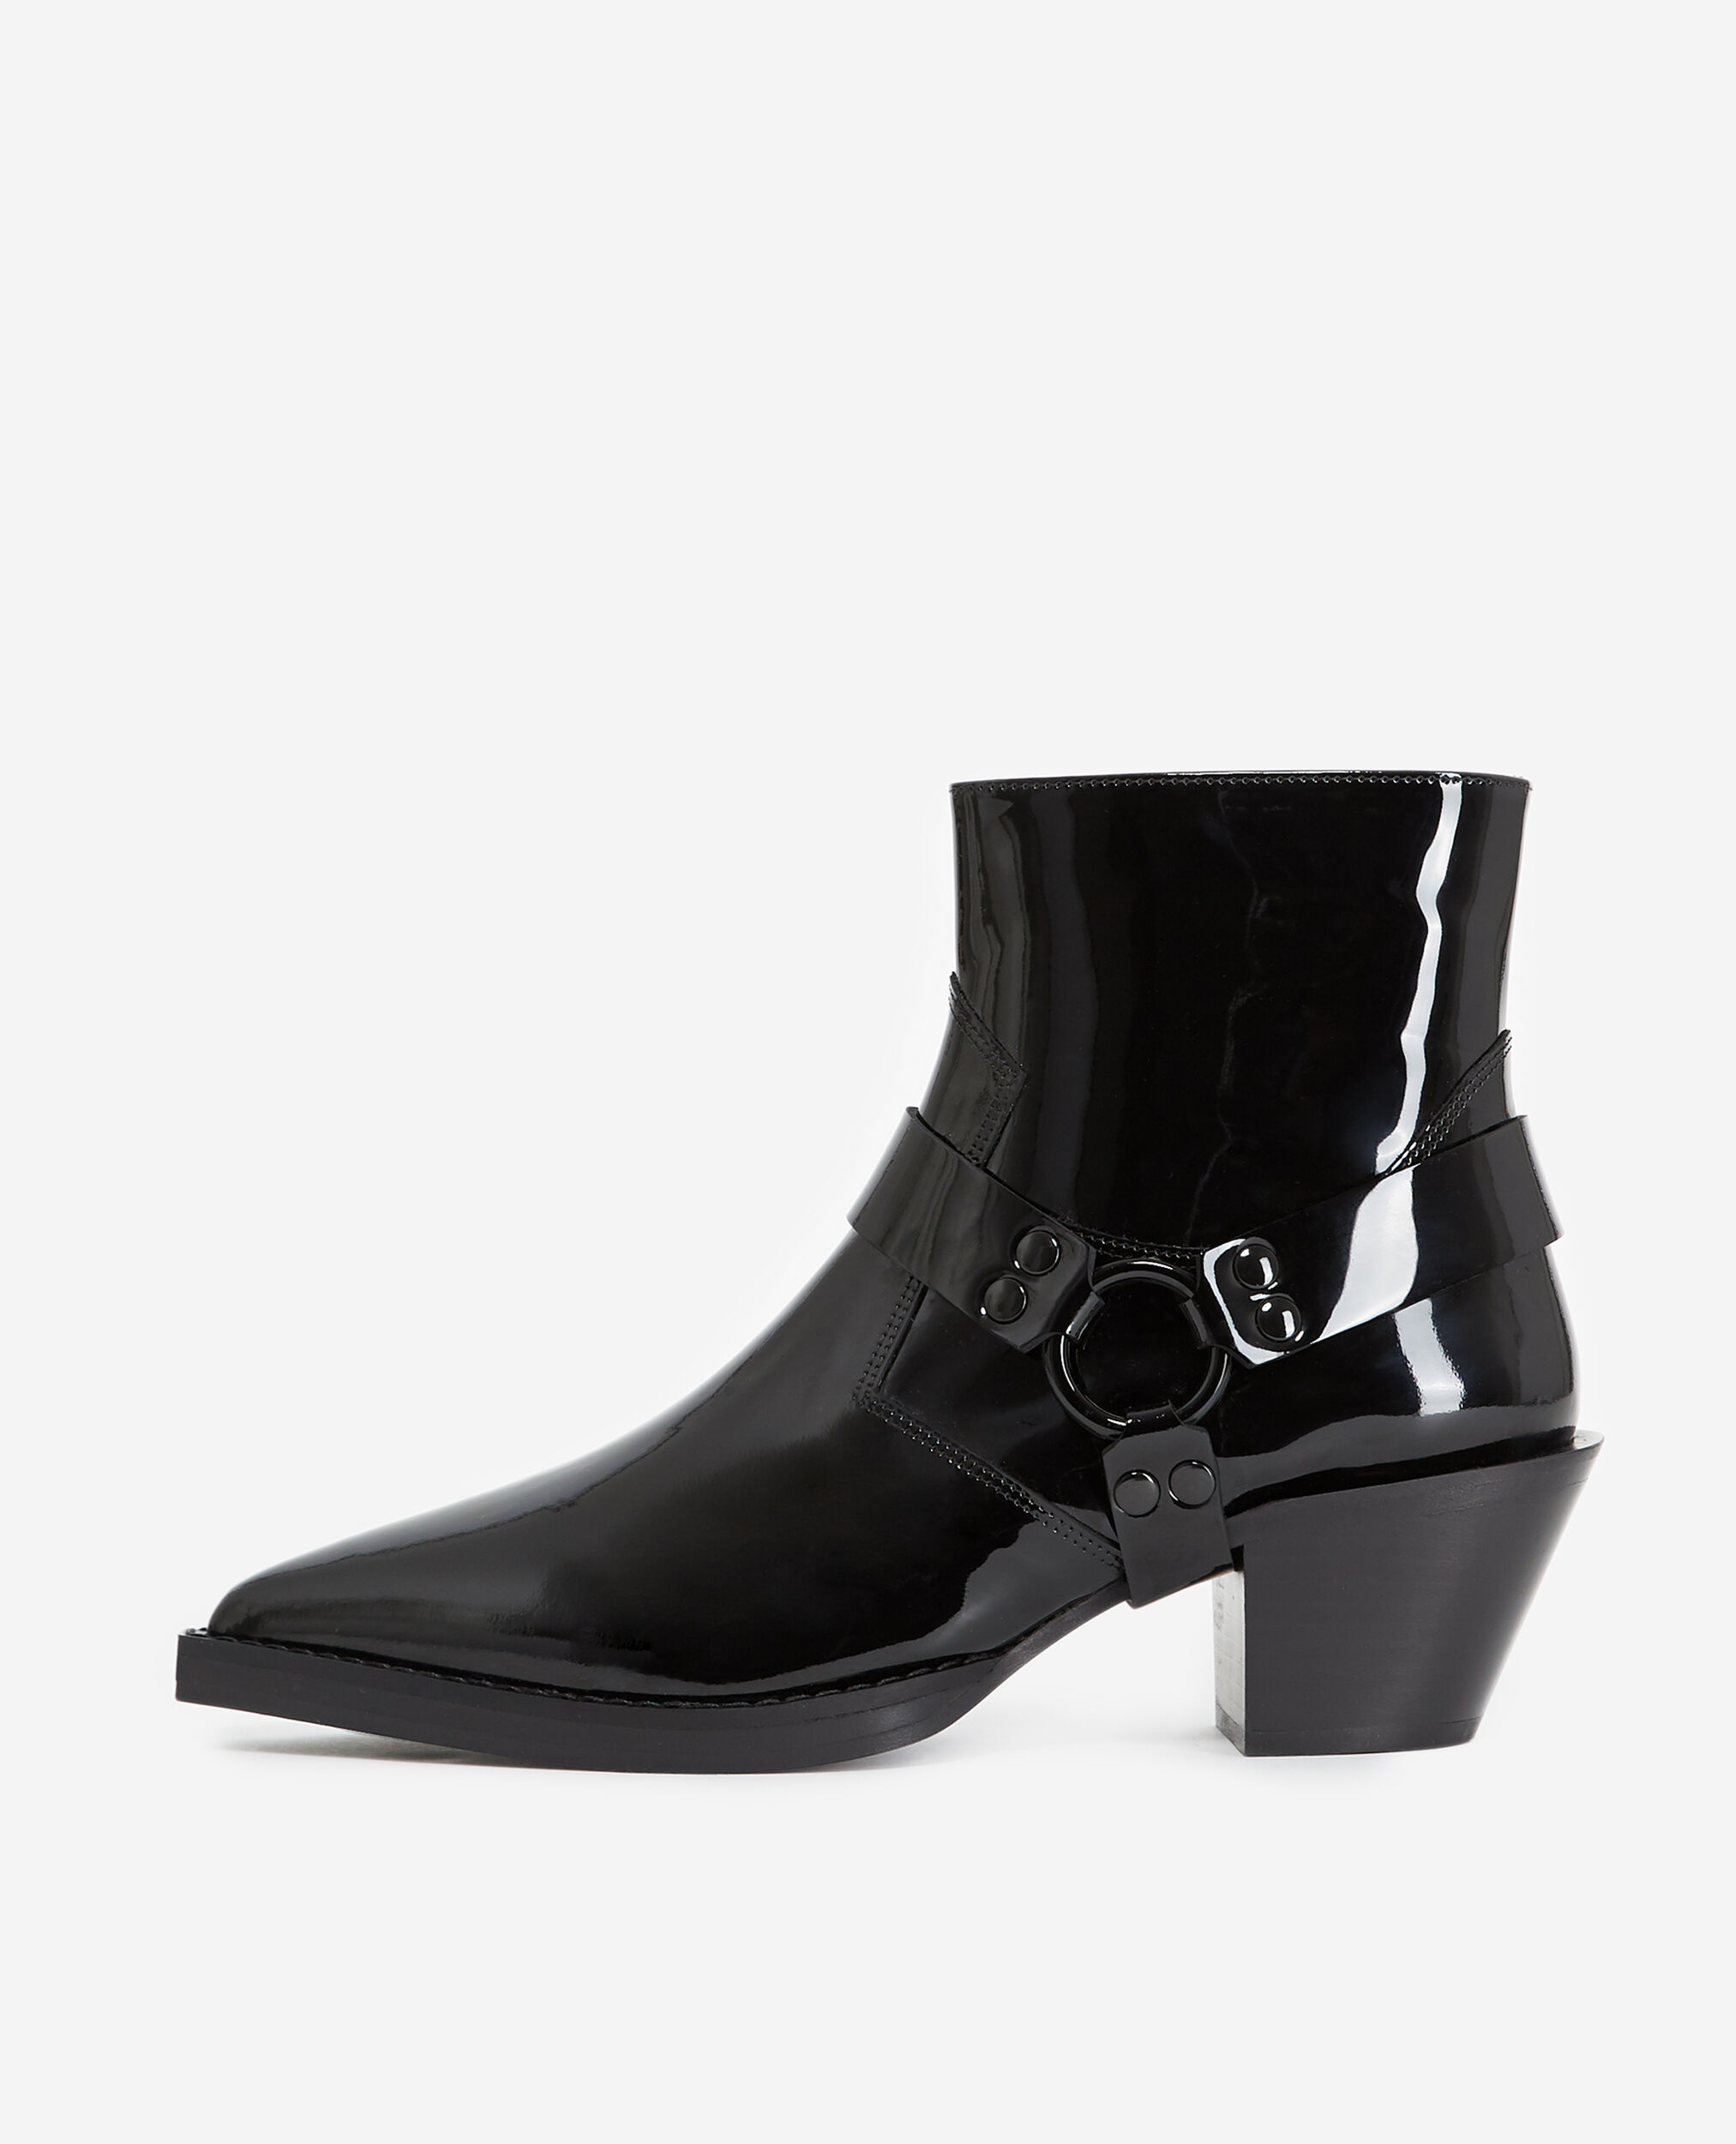 Ankle Black Patent Boots | lupon.gov.ph